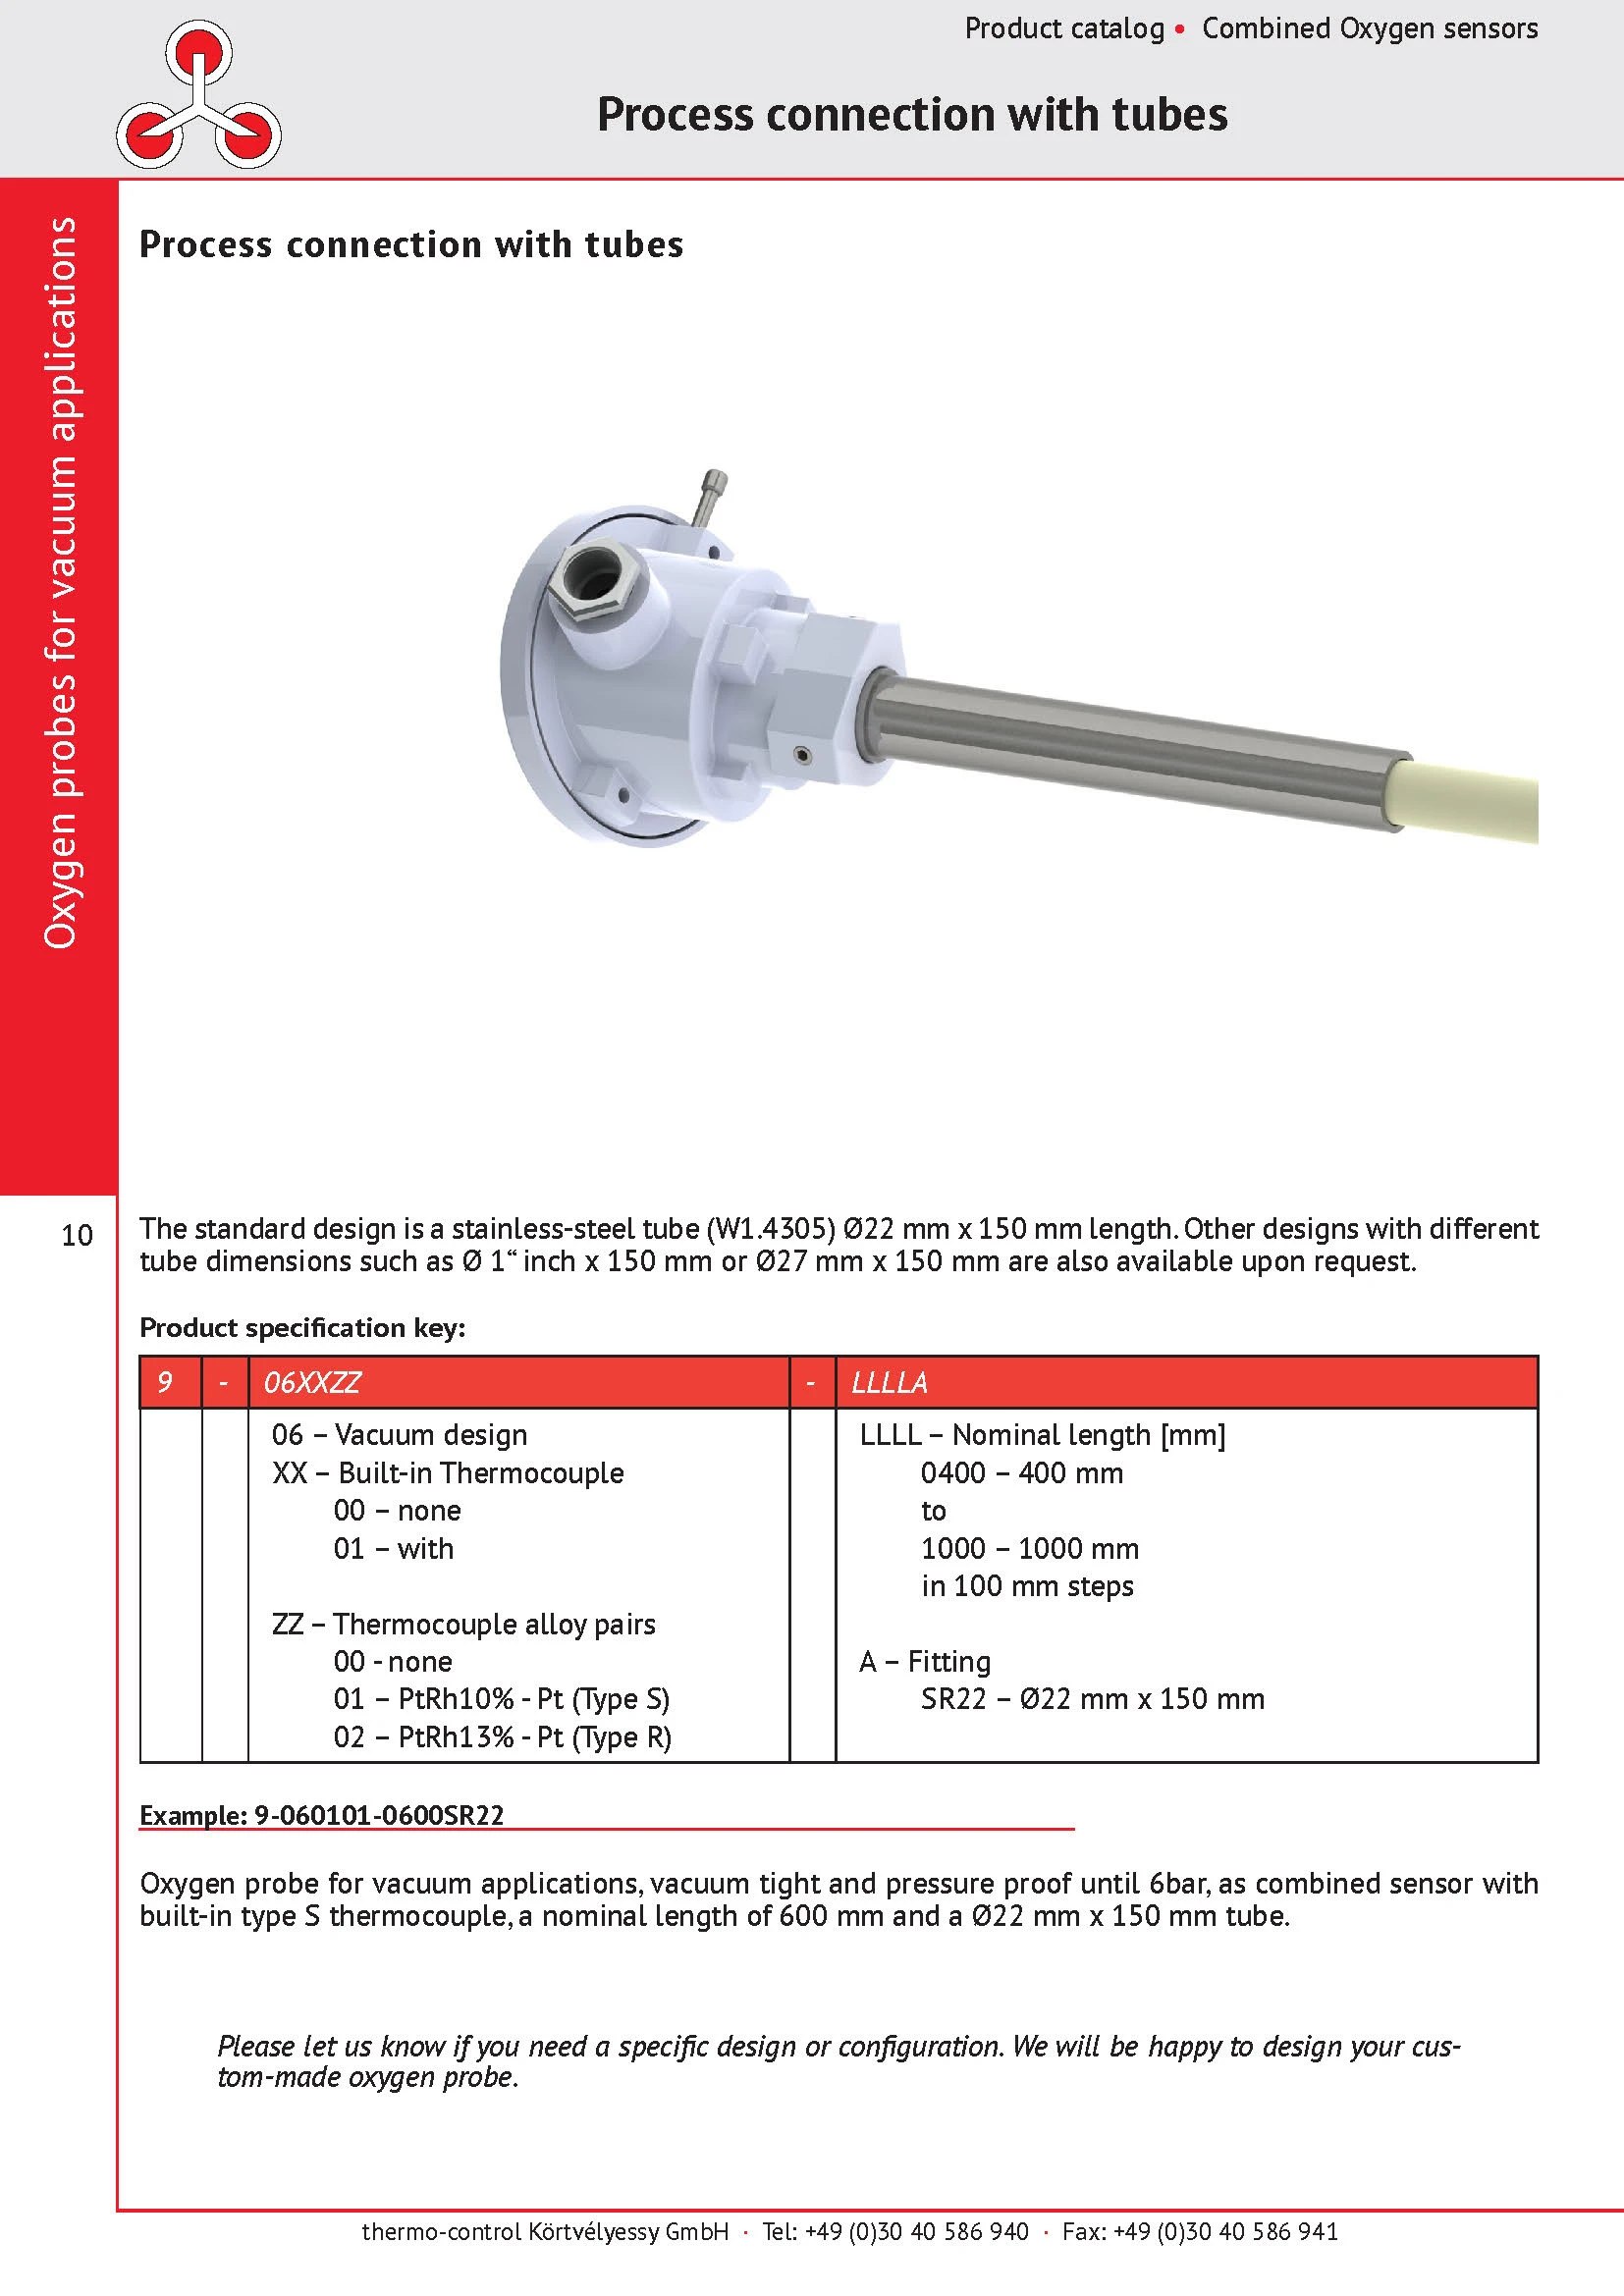 thermo-control Körtvélyessy - Catalog for vacuum oxygen probes with mounting tubes